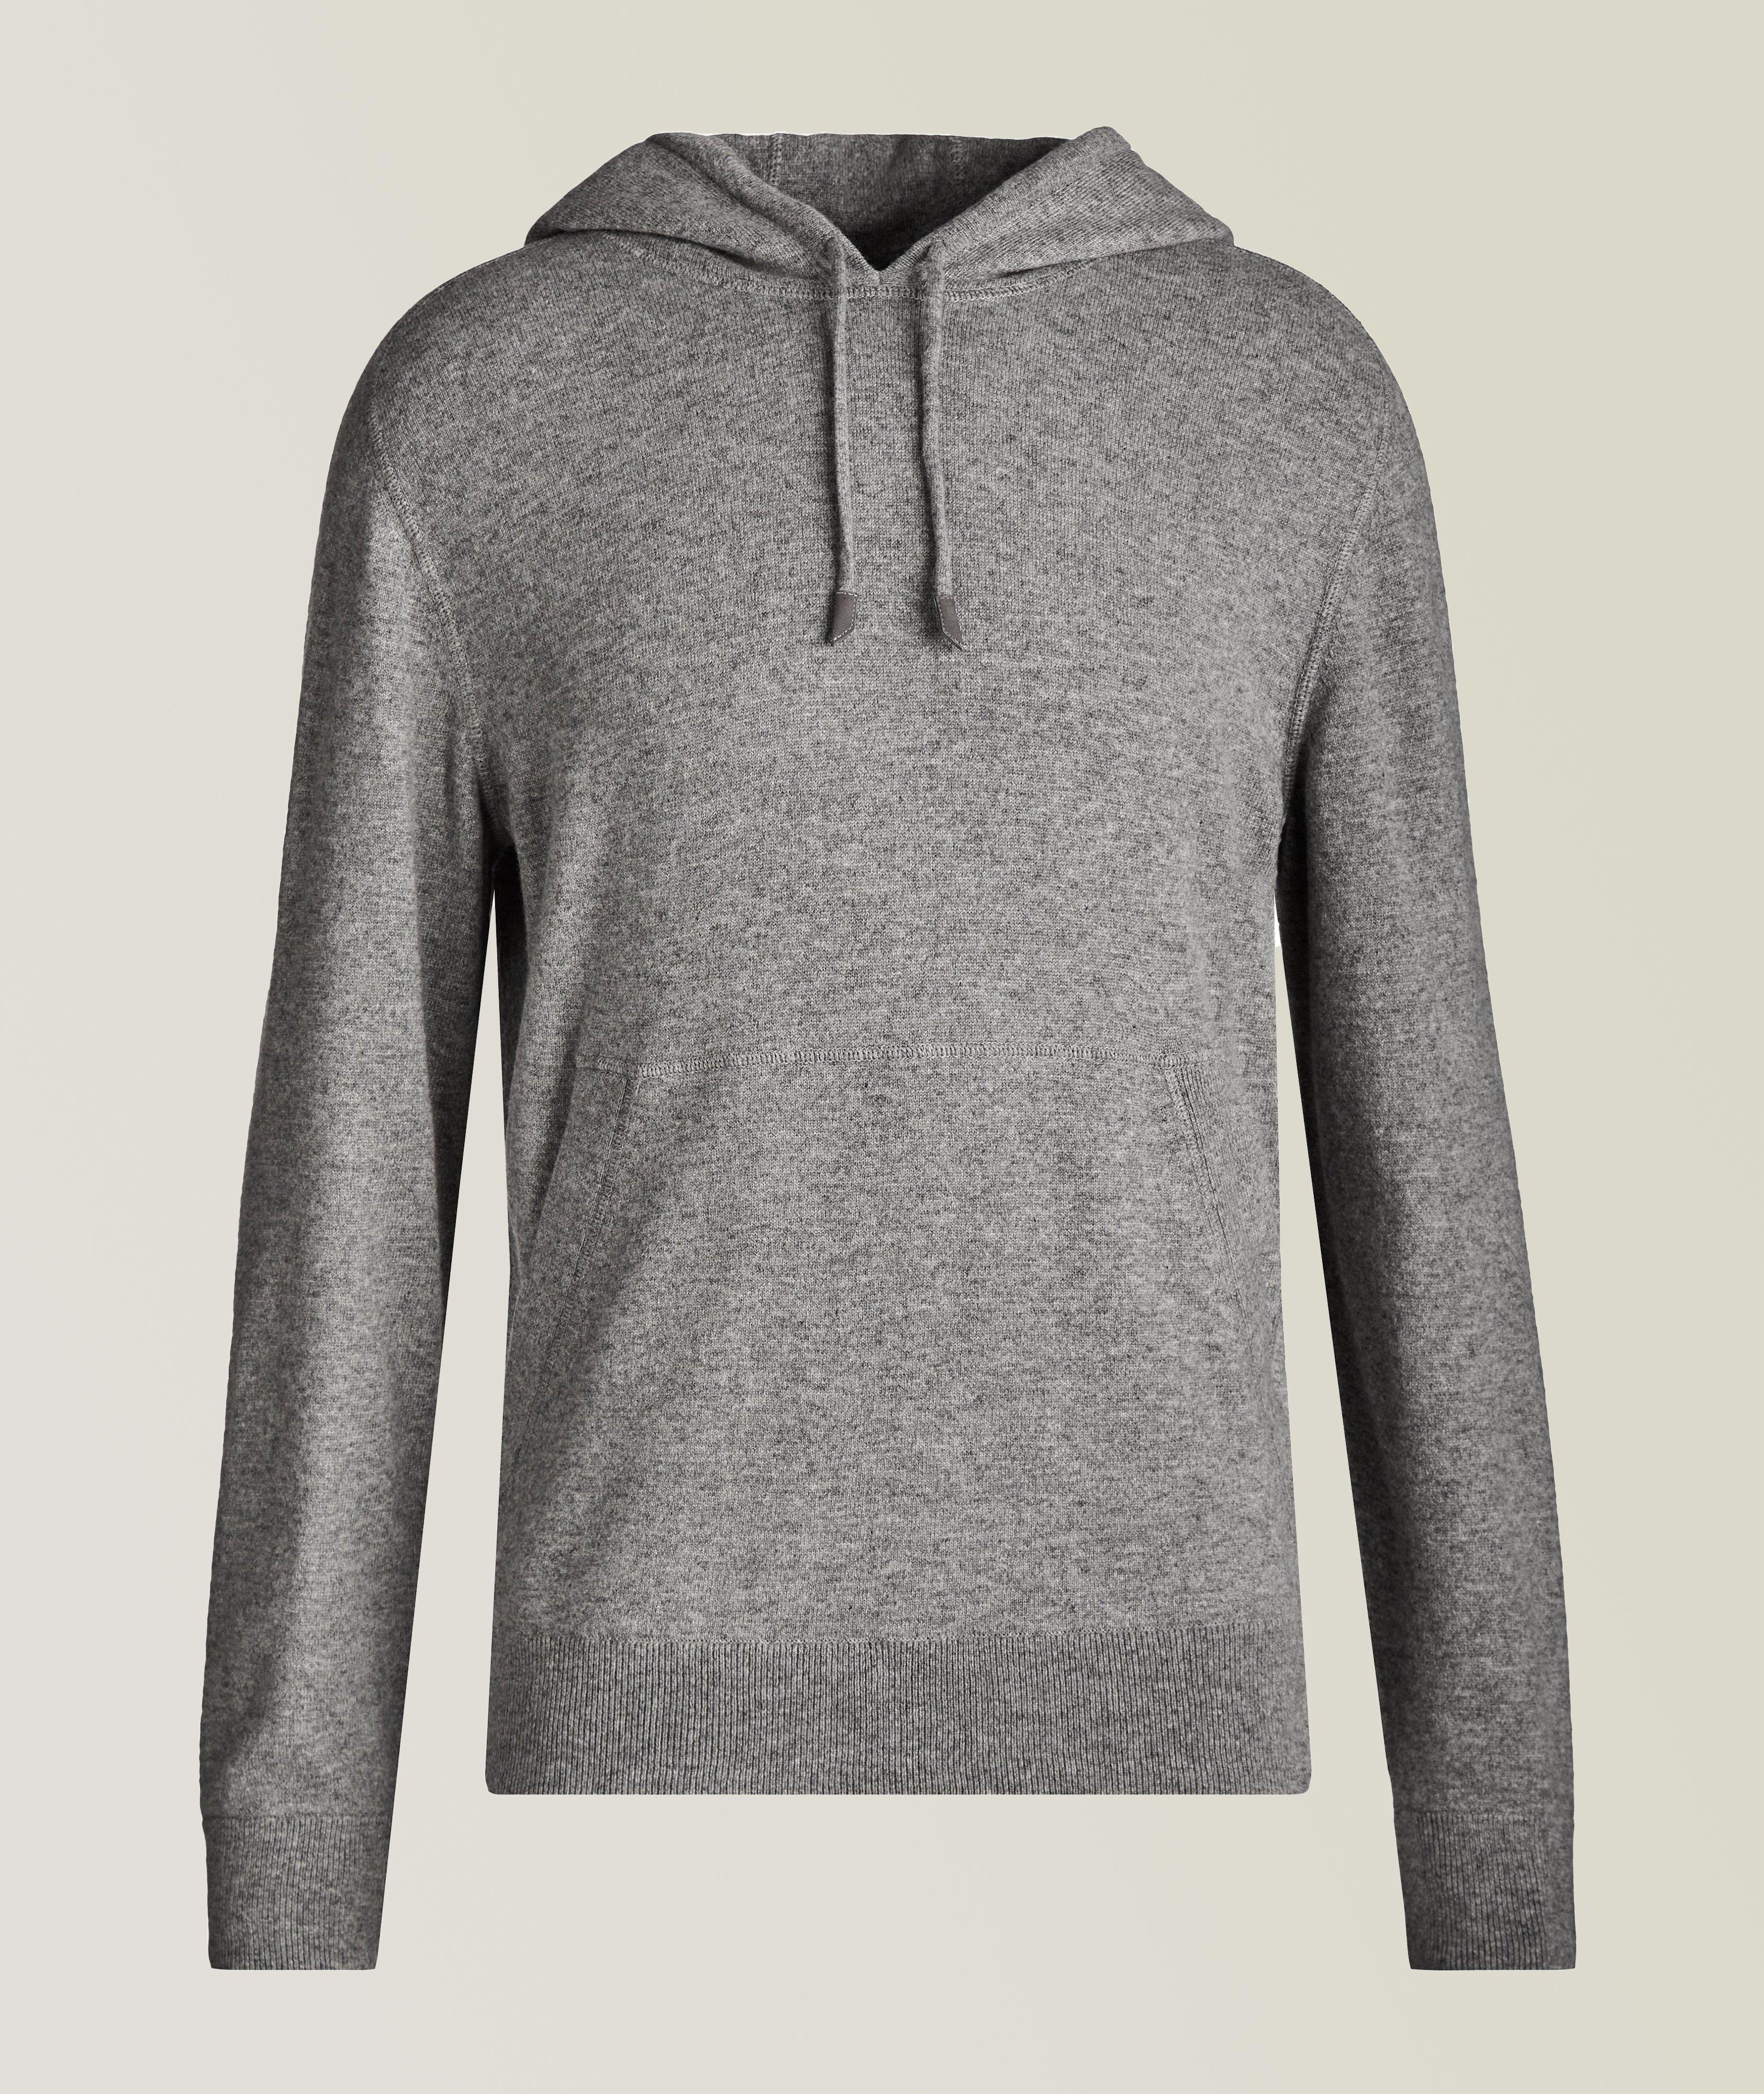 Zegna Oasi Cashmere Hooded Pullover